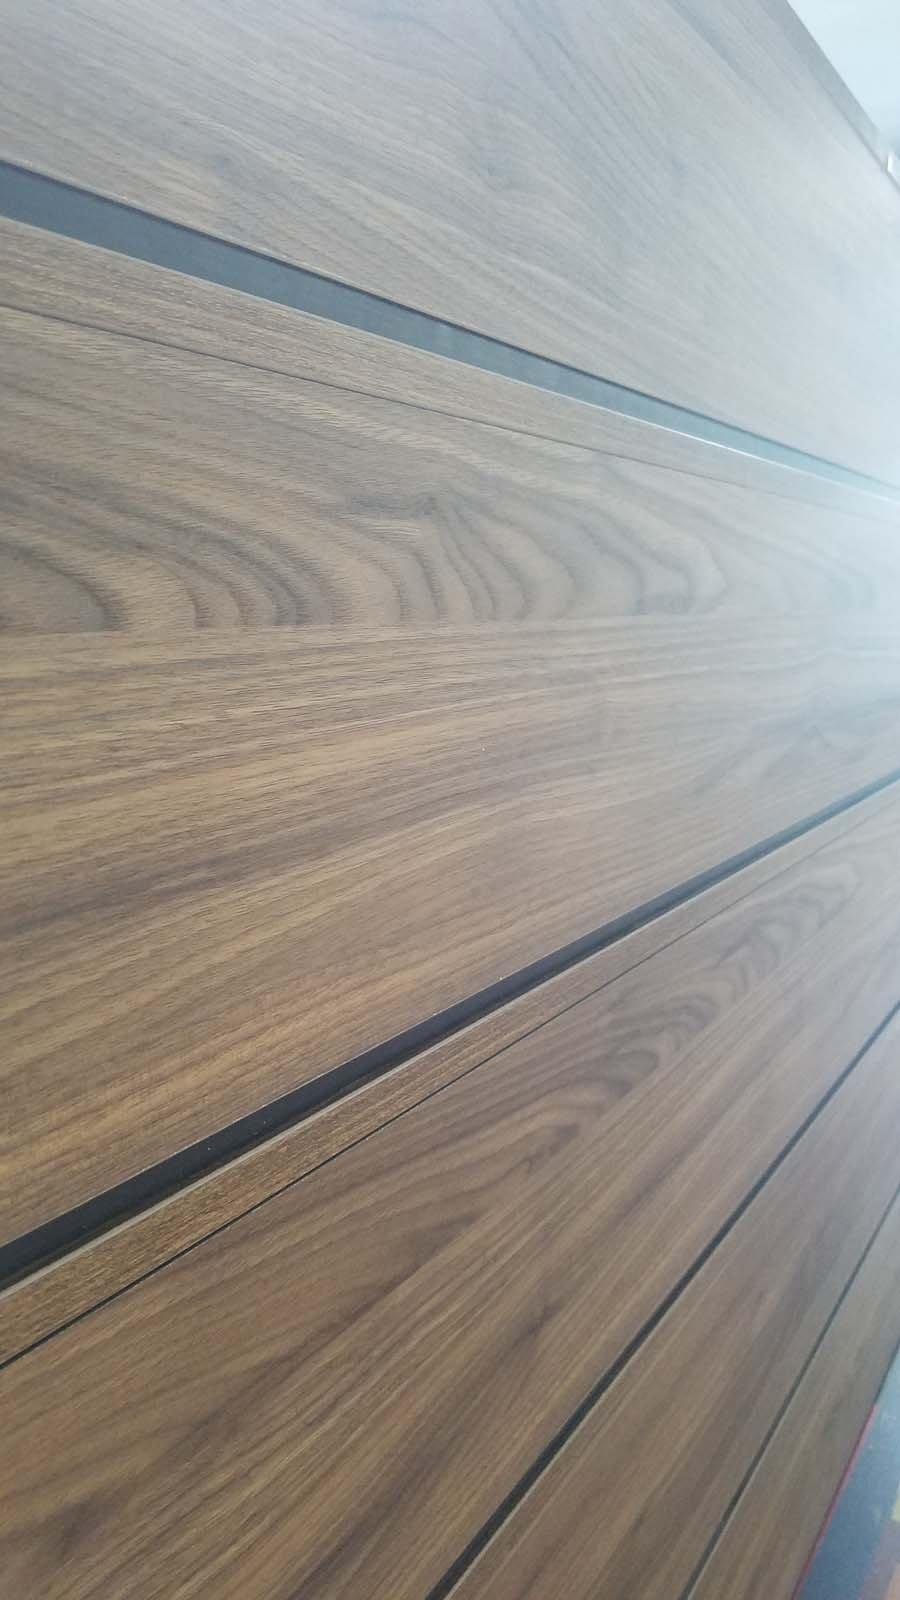 where to buy wood paneling for walls melamine panel plywood panels I.DECOR Decorative Material Warranty